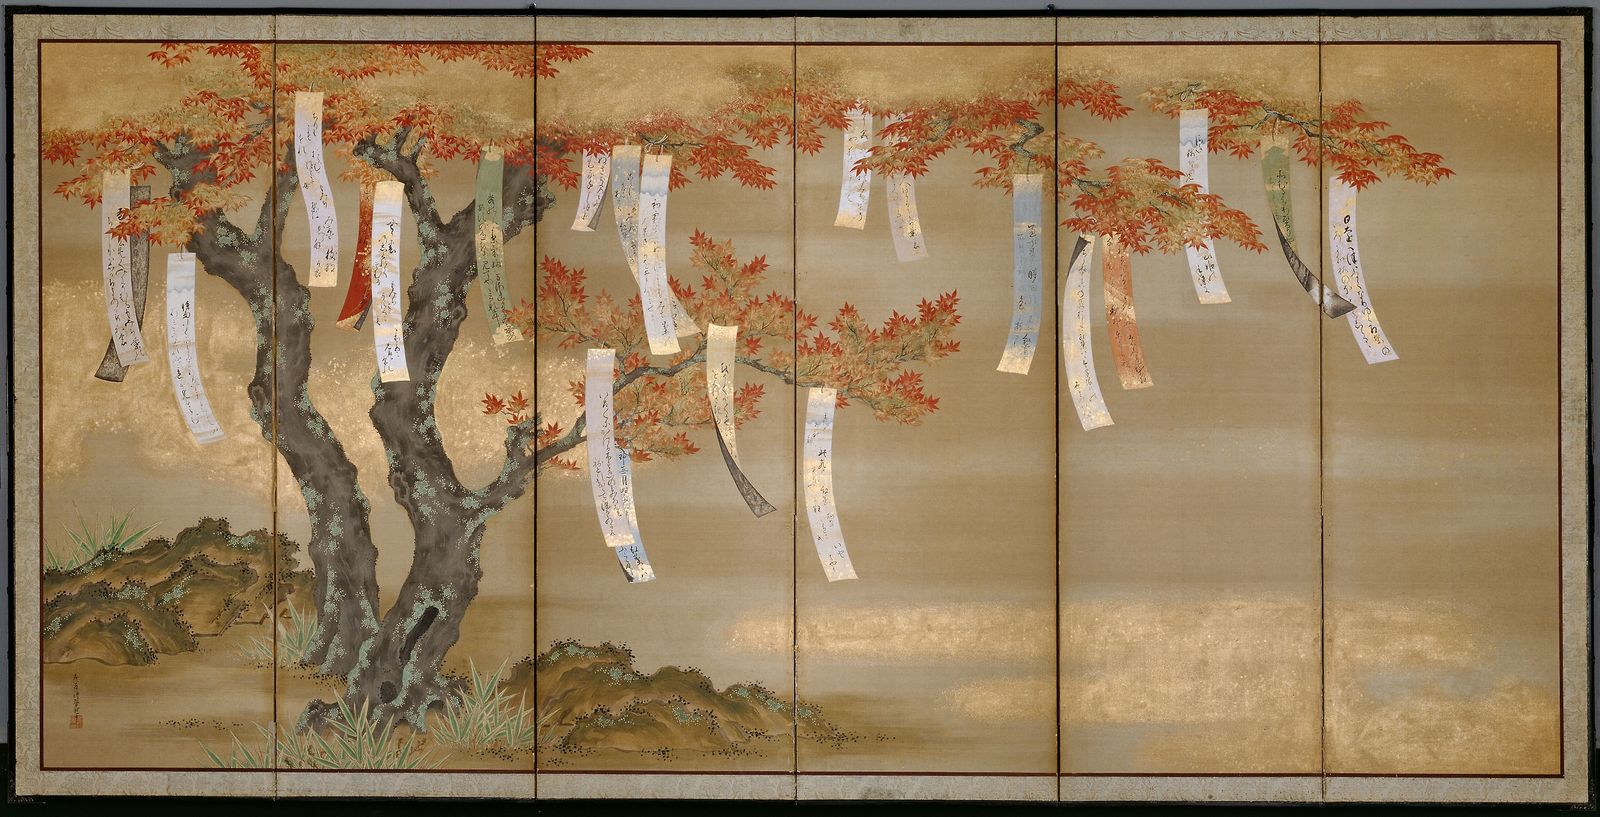 A screen with a painting of a maple tree in autumn colours, and many tanzaku hanging from its branches.